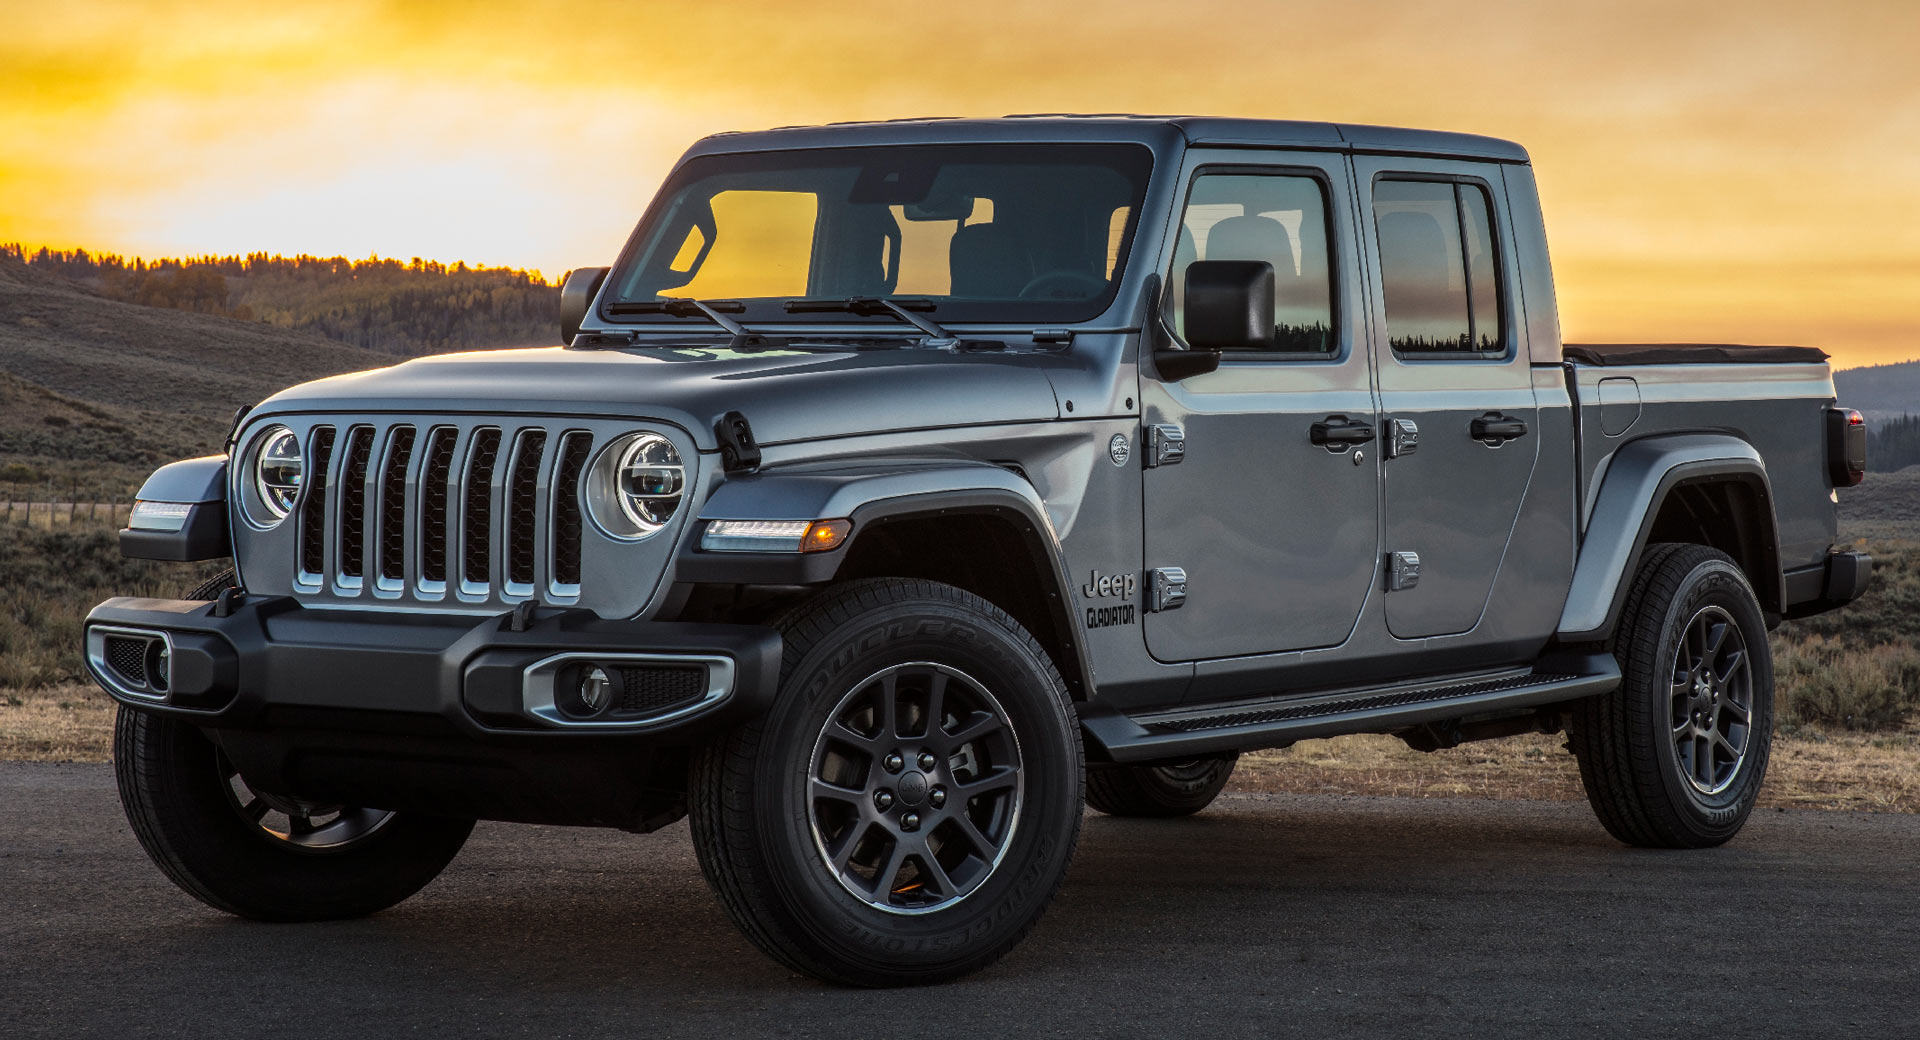 2020 Jeep Gladiator Won't Be Offered With The Turbo Four-Cylinder Because  Of Heat / Towing Issues | Carscoops